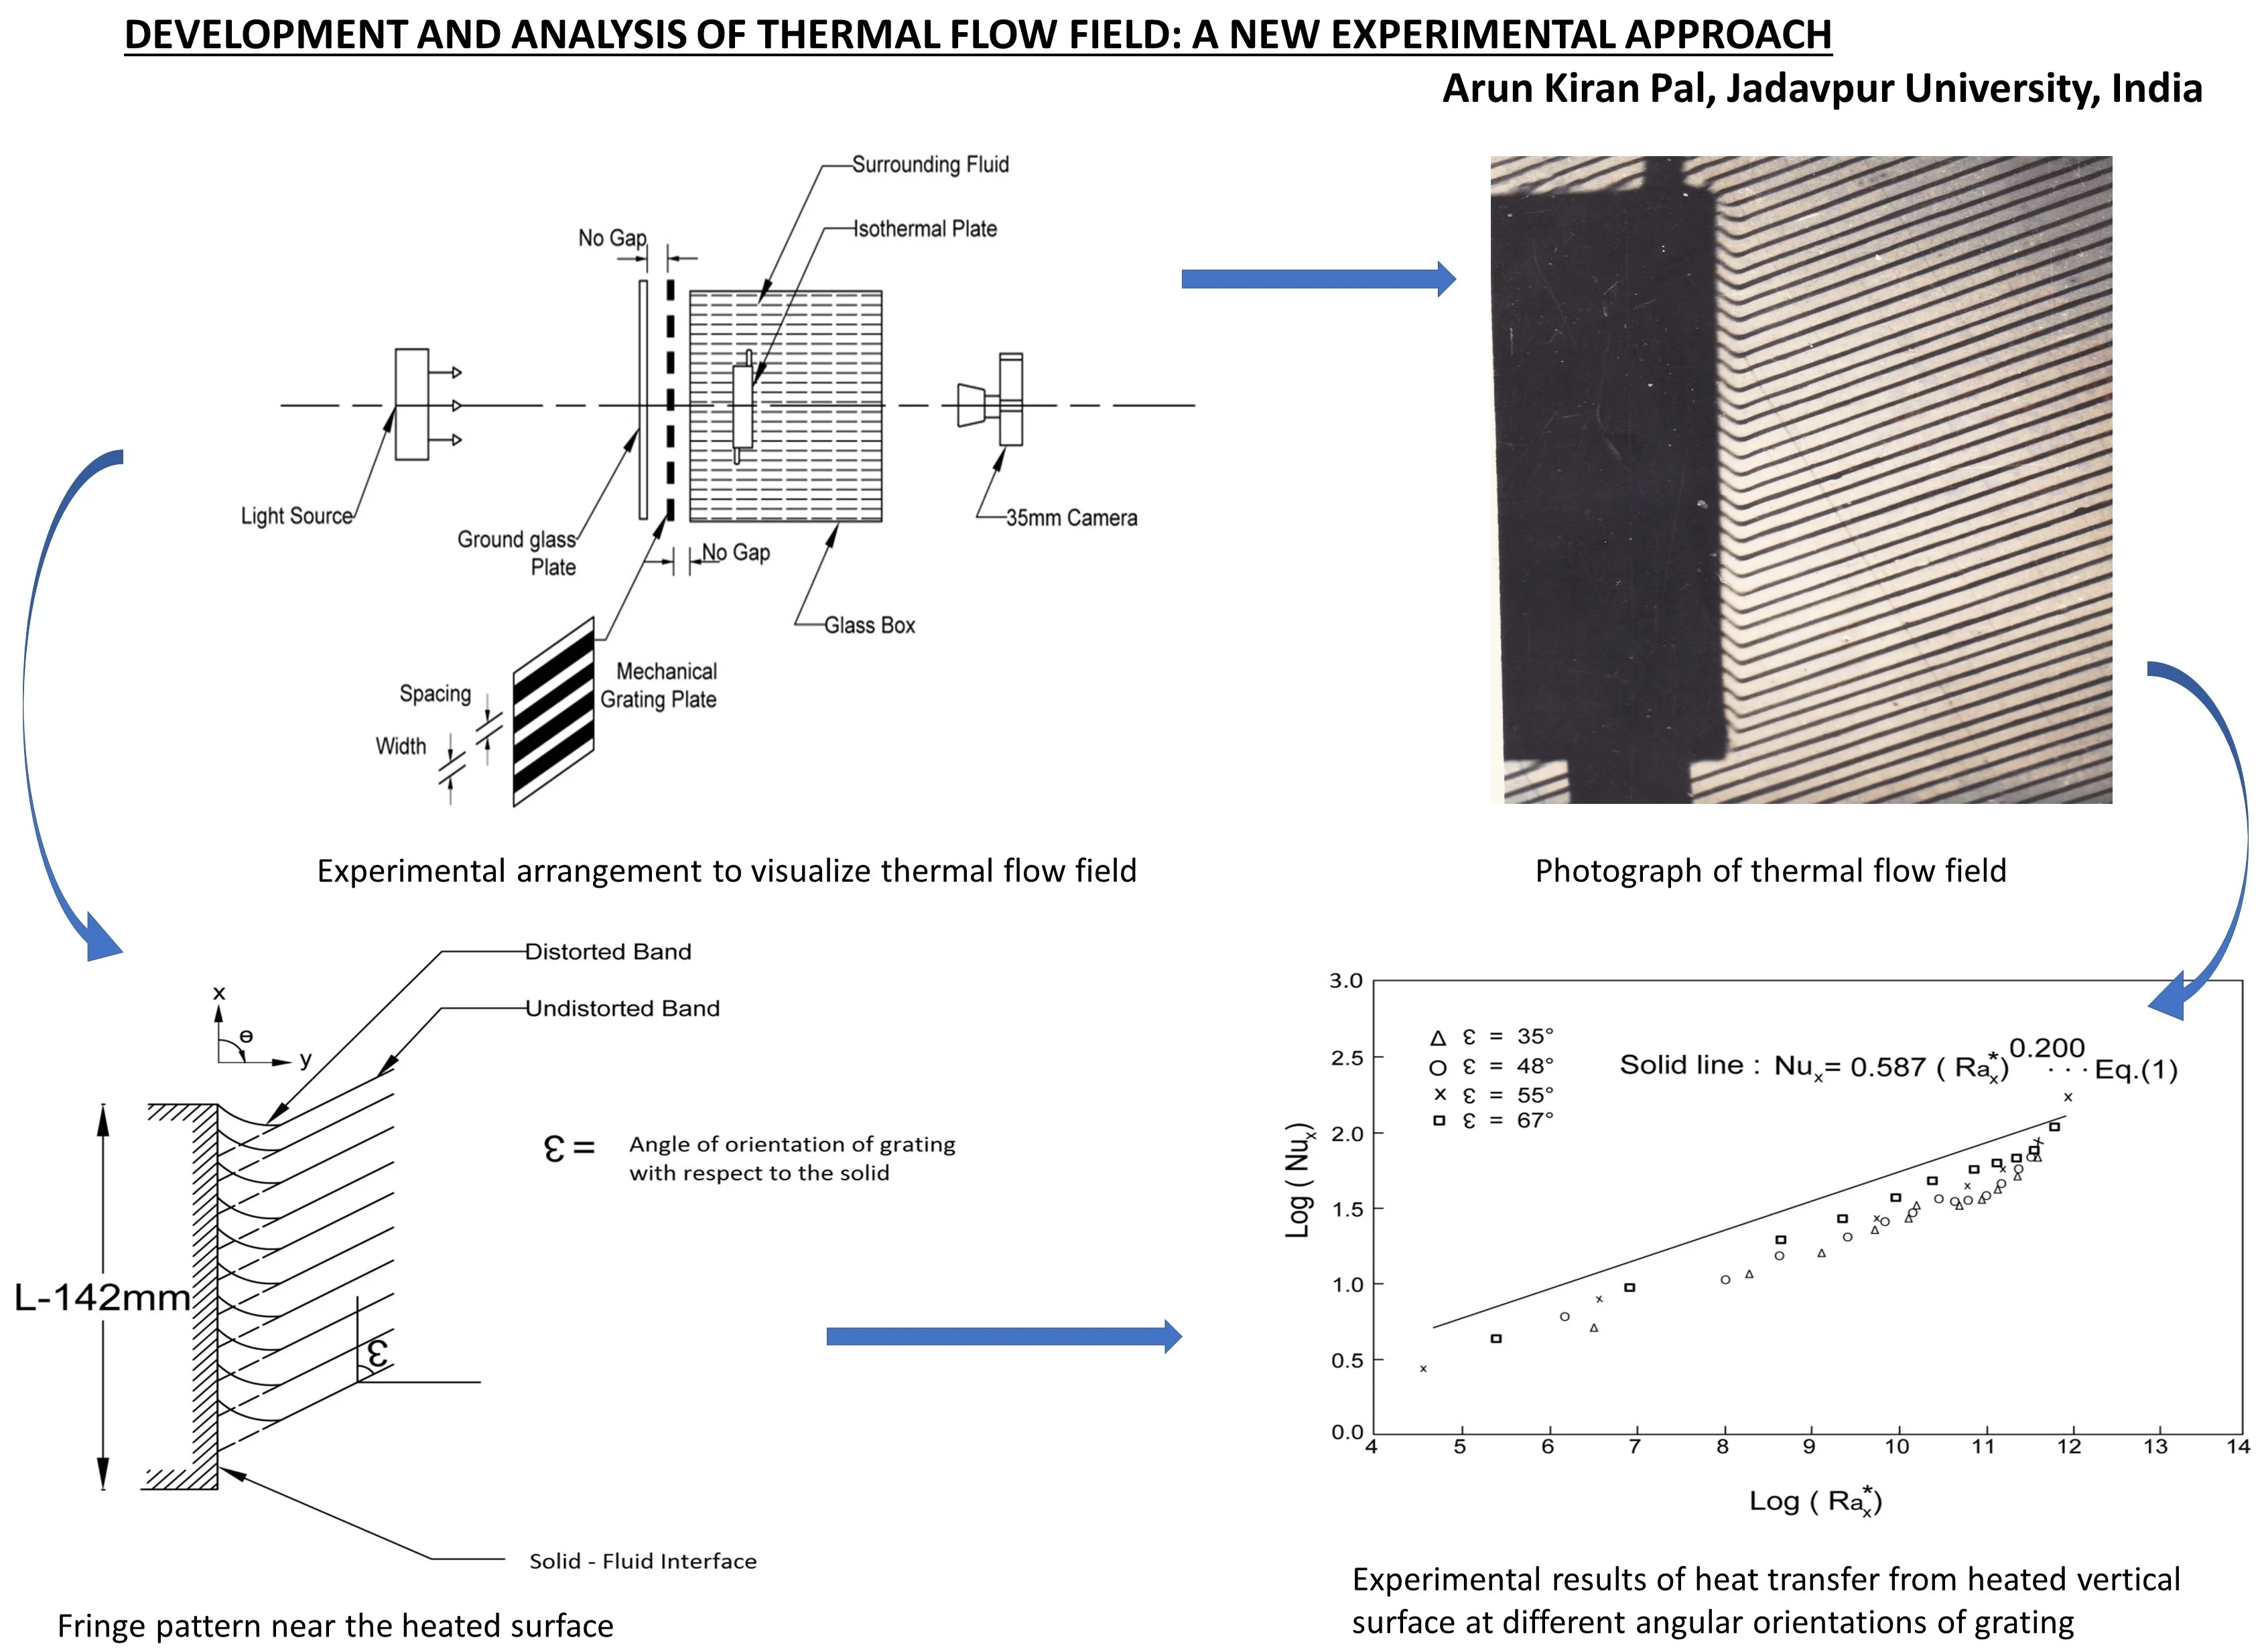 Development and analysis of thermal flow field: a new experimental approach